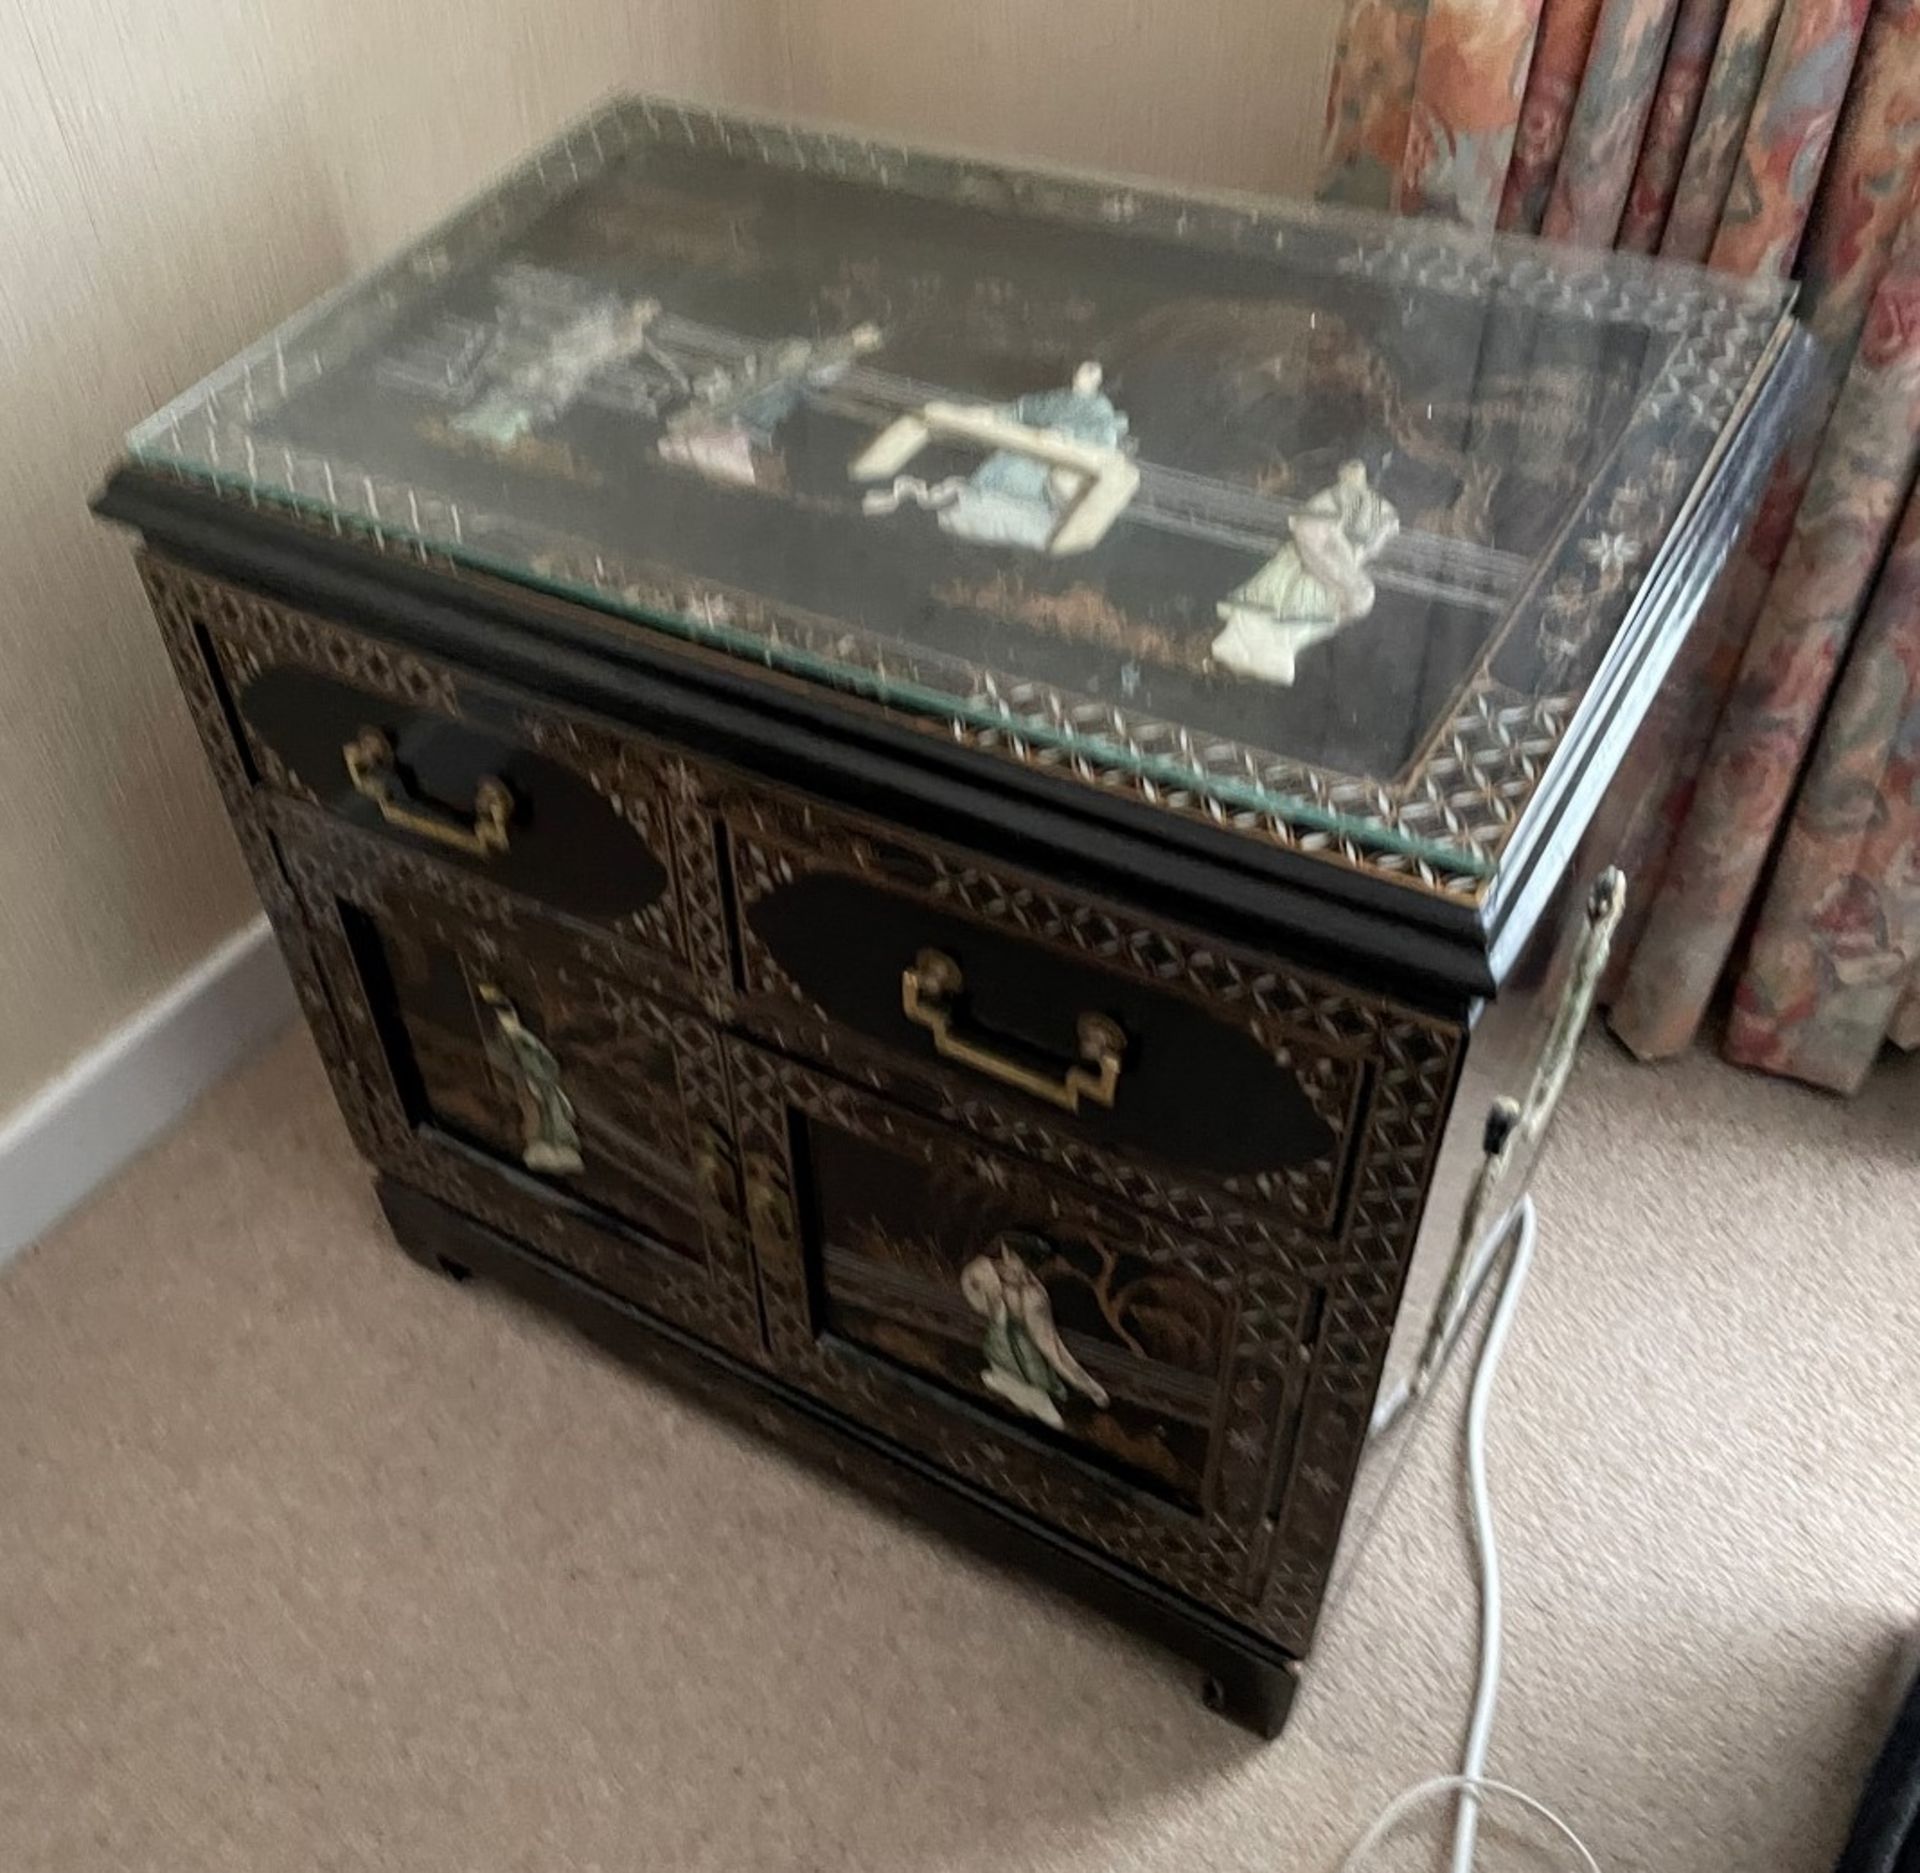 1 x Vintage Chinese Glass Topped Unit Featuring Embosed Figures - Dimensions: 61 x 40 x H60cm - Image 3 of 8